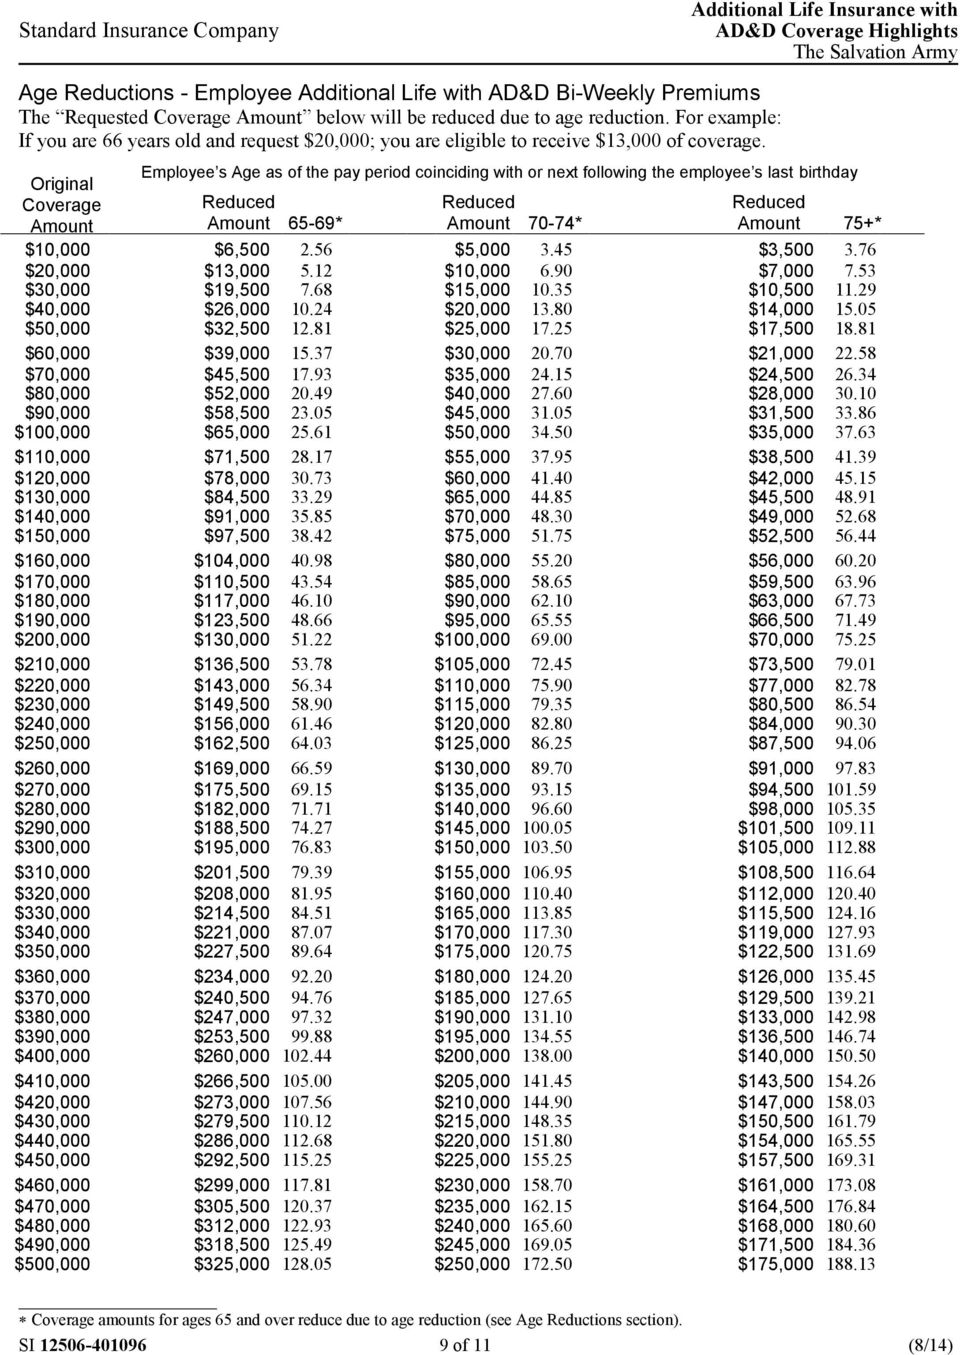 Original Amount Employee s Age as of the pay period coinciding with or next following the employee s last birthday Amount 65-69* Amount 70-74* Amount 75+* $10,000 $6,500 2.56 $5,000 3.45 $3,500 3.